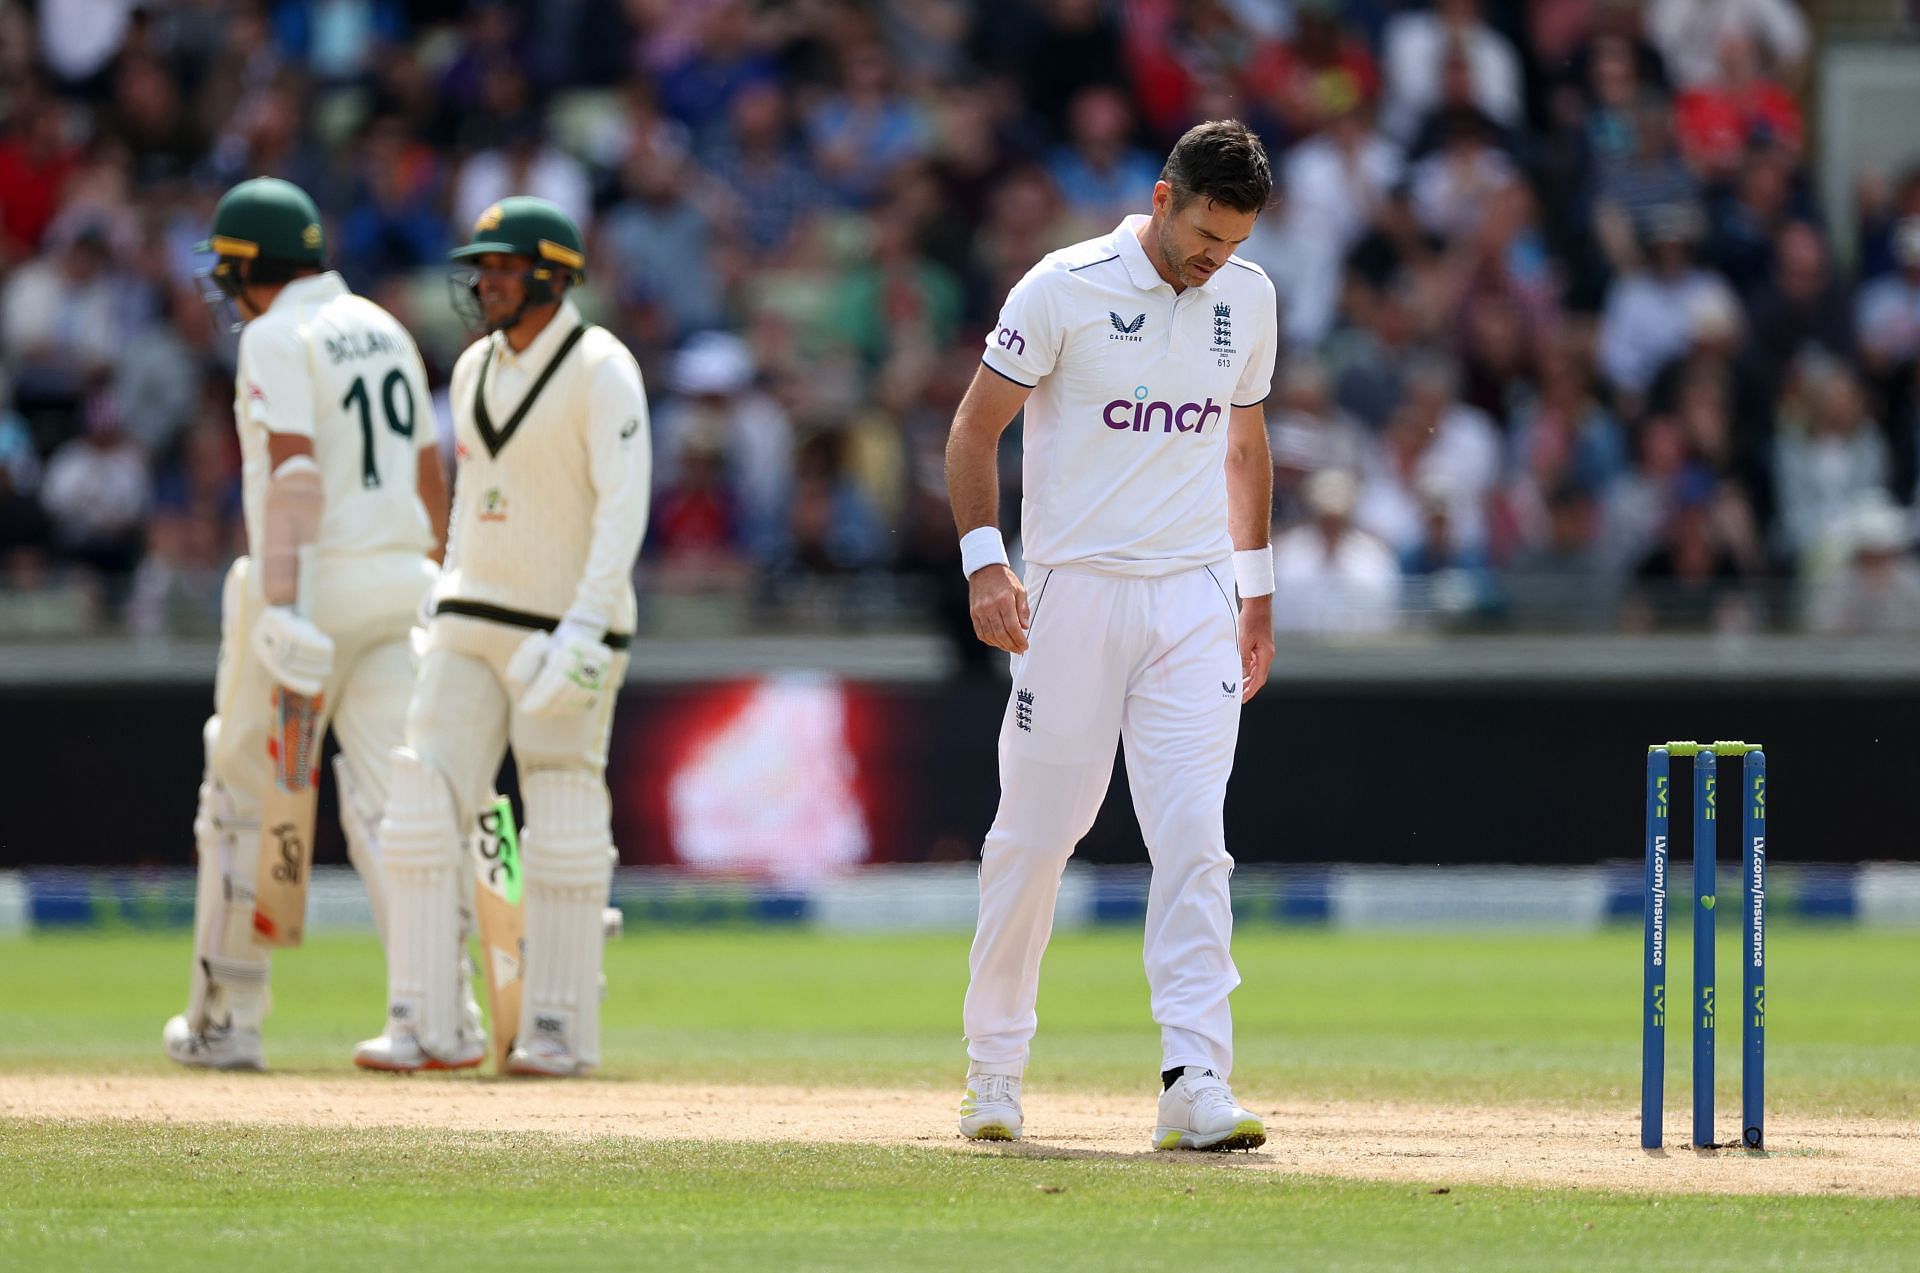 James Anderson picked up just a solitary wicket in the Edgbaston Test.